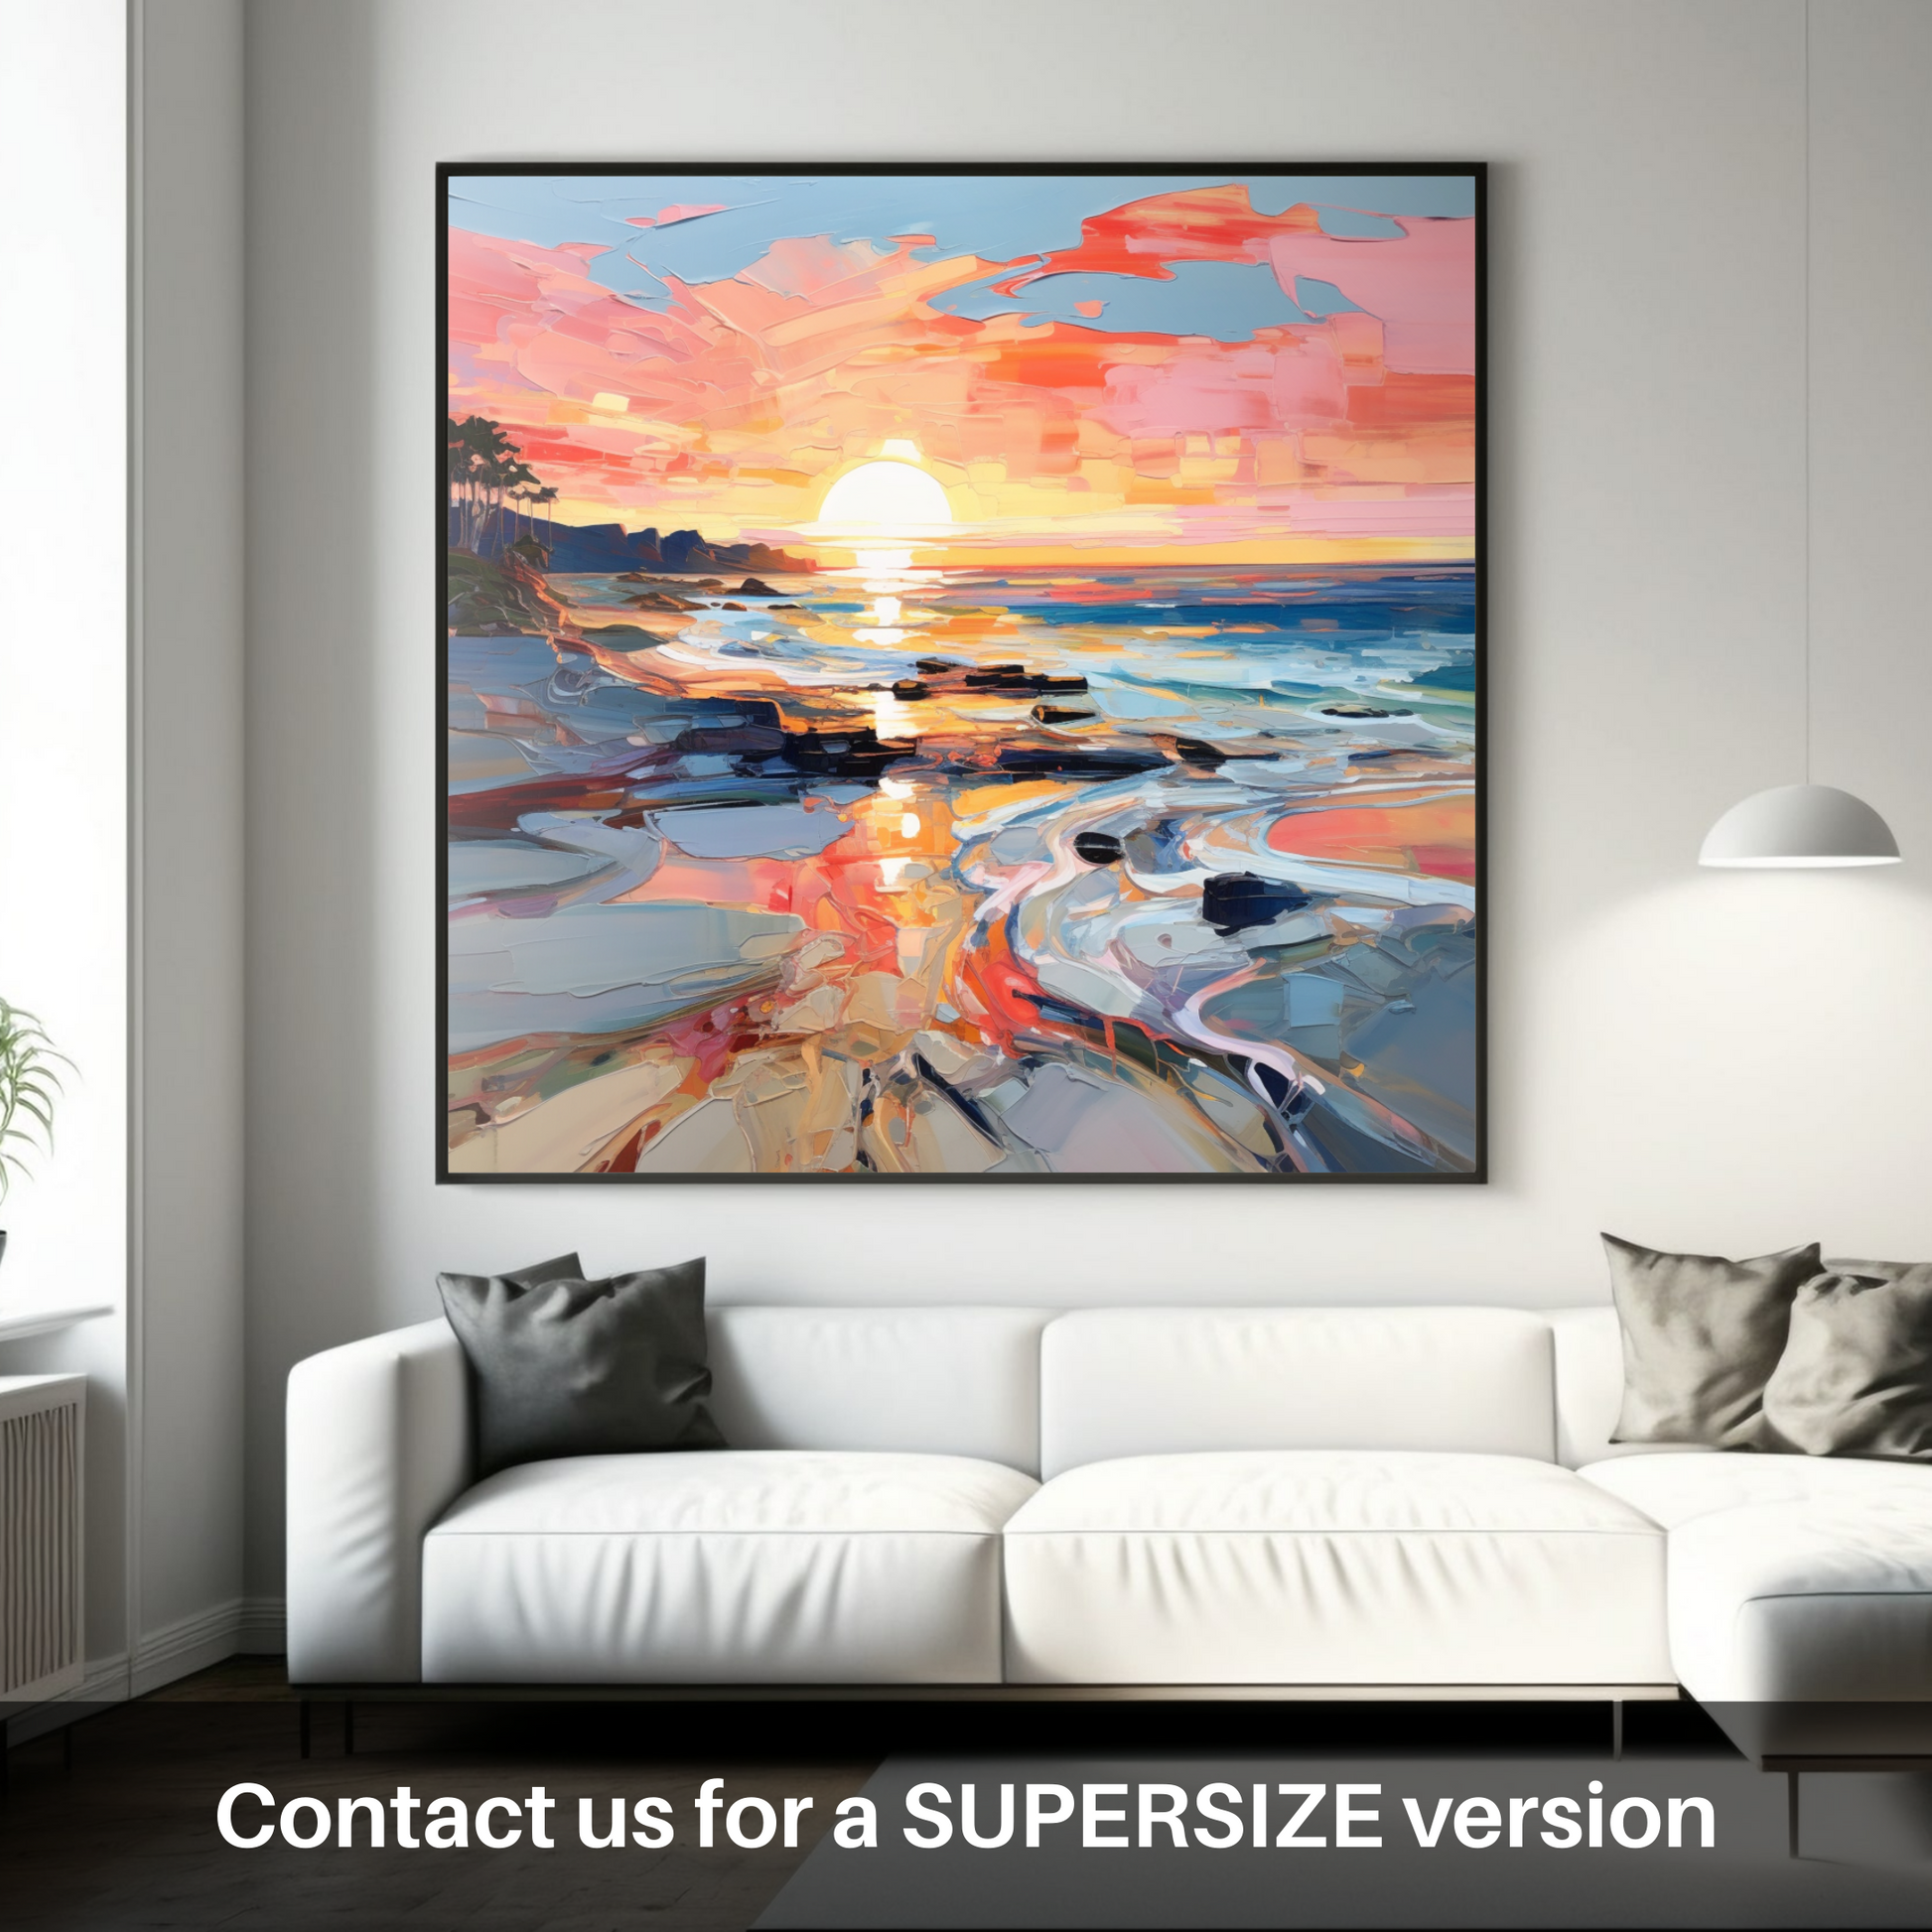 Huge supersize print of Coral Beach at sunset